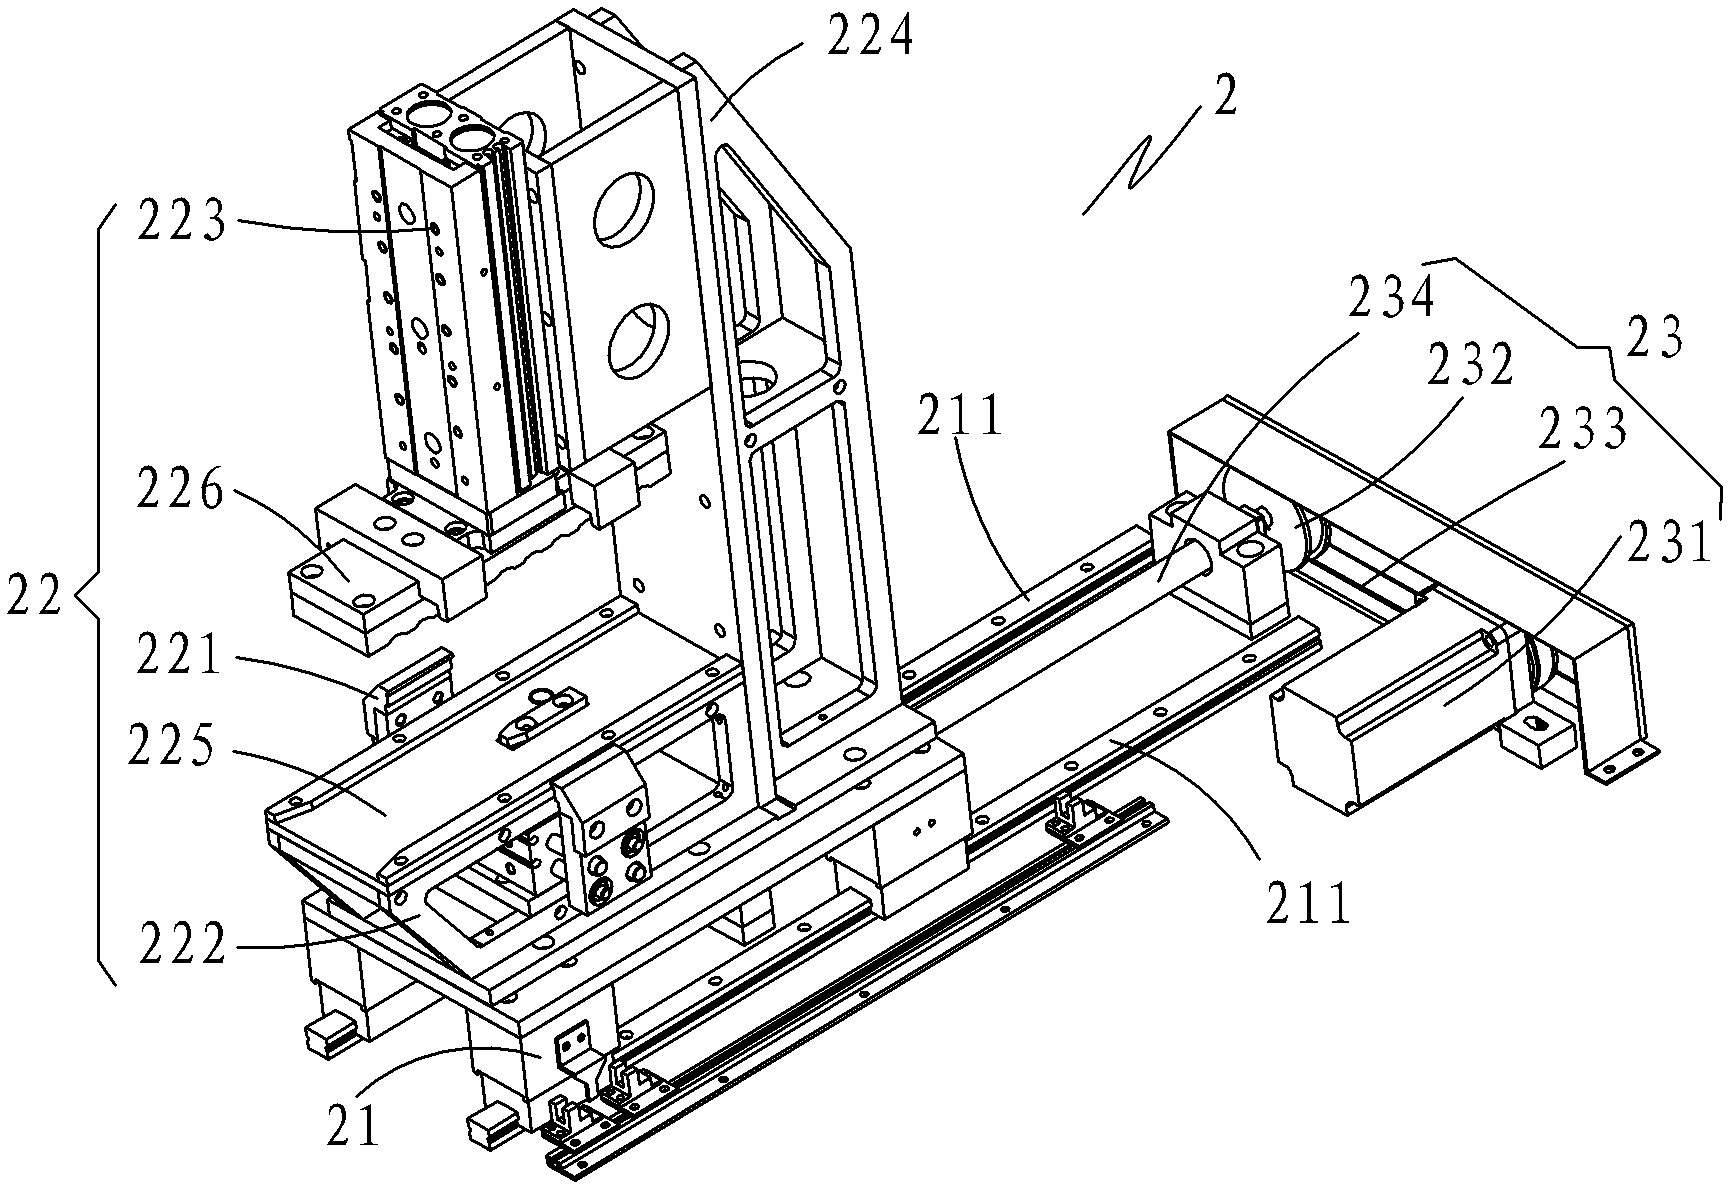 Spot welding system for electrode plates of power battery pack